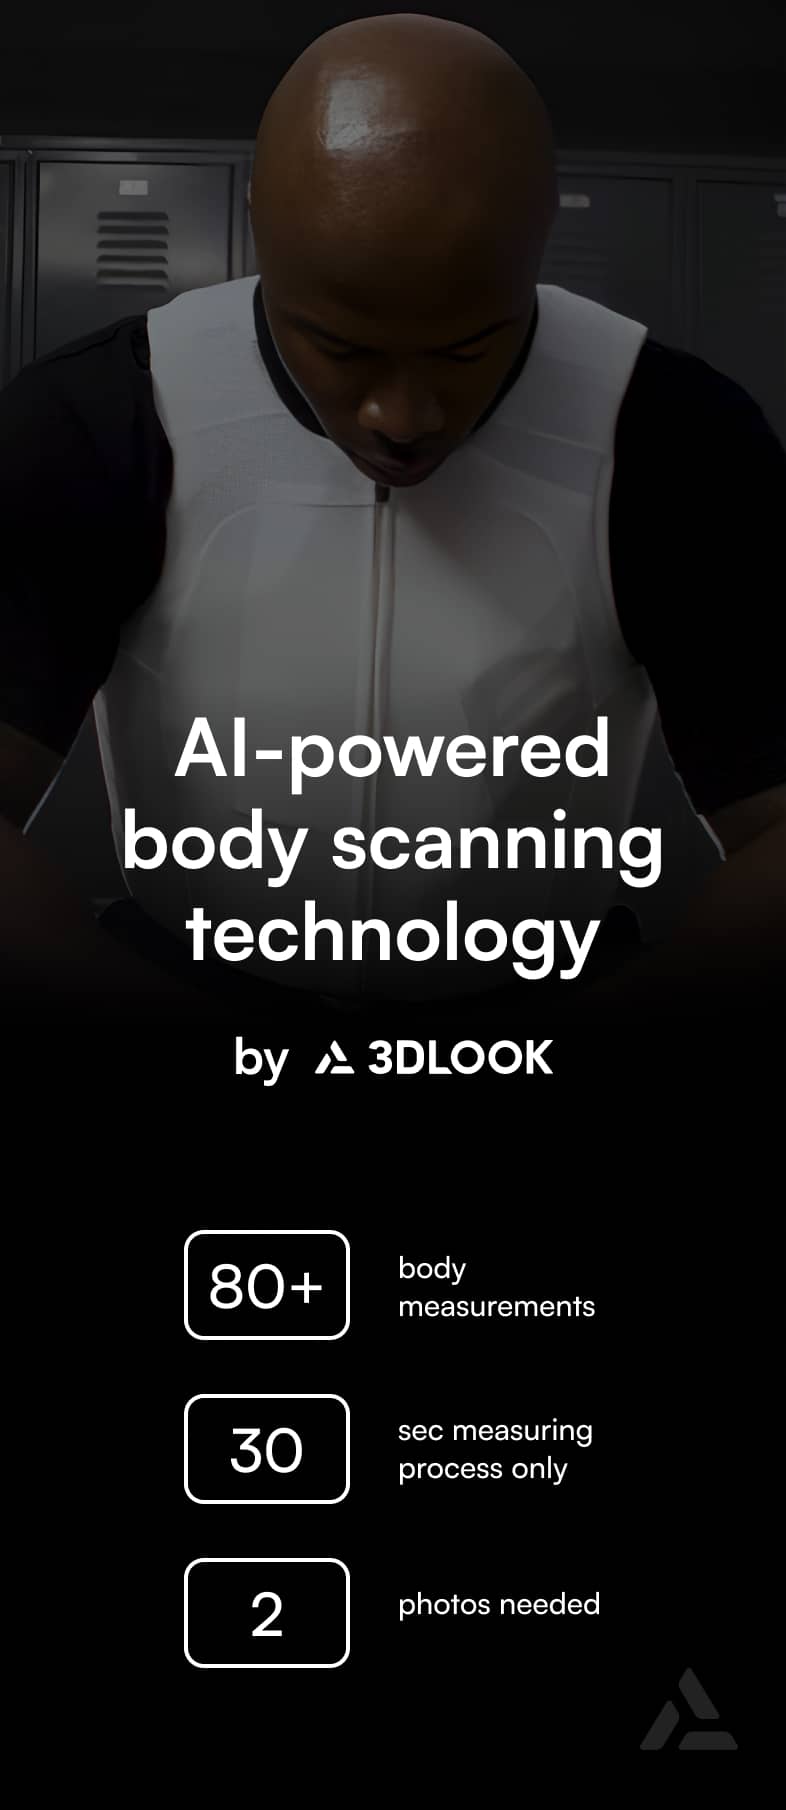 Man undergoing AI-powered mobile body scanning using 3DLook technology for Body Armor by Safariland Group.